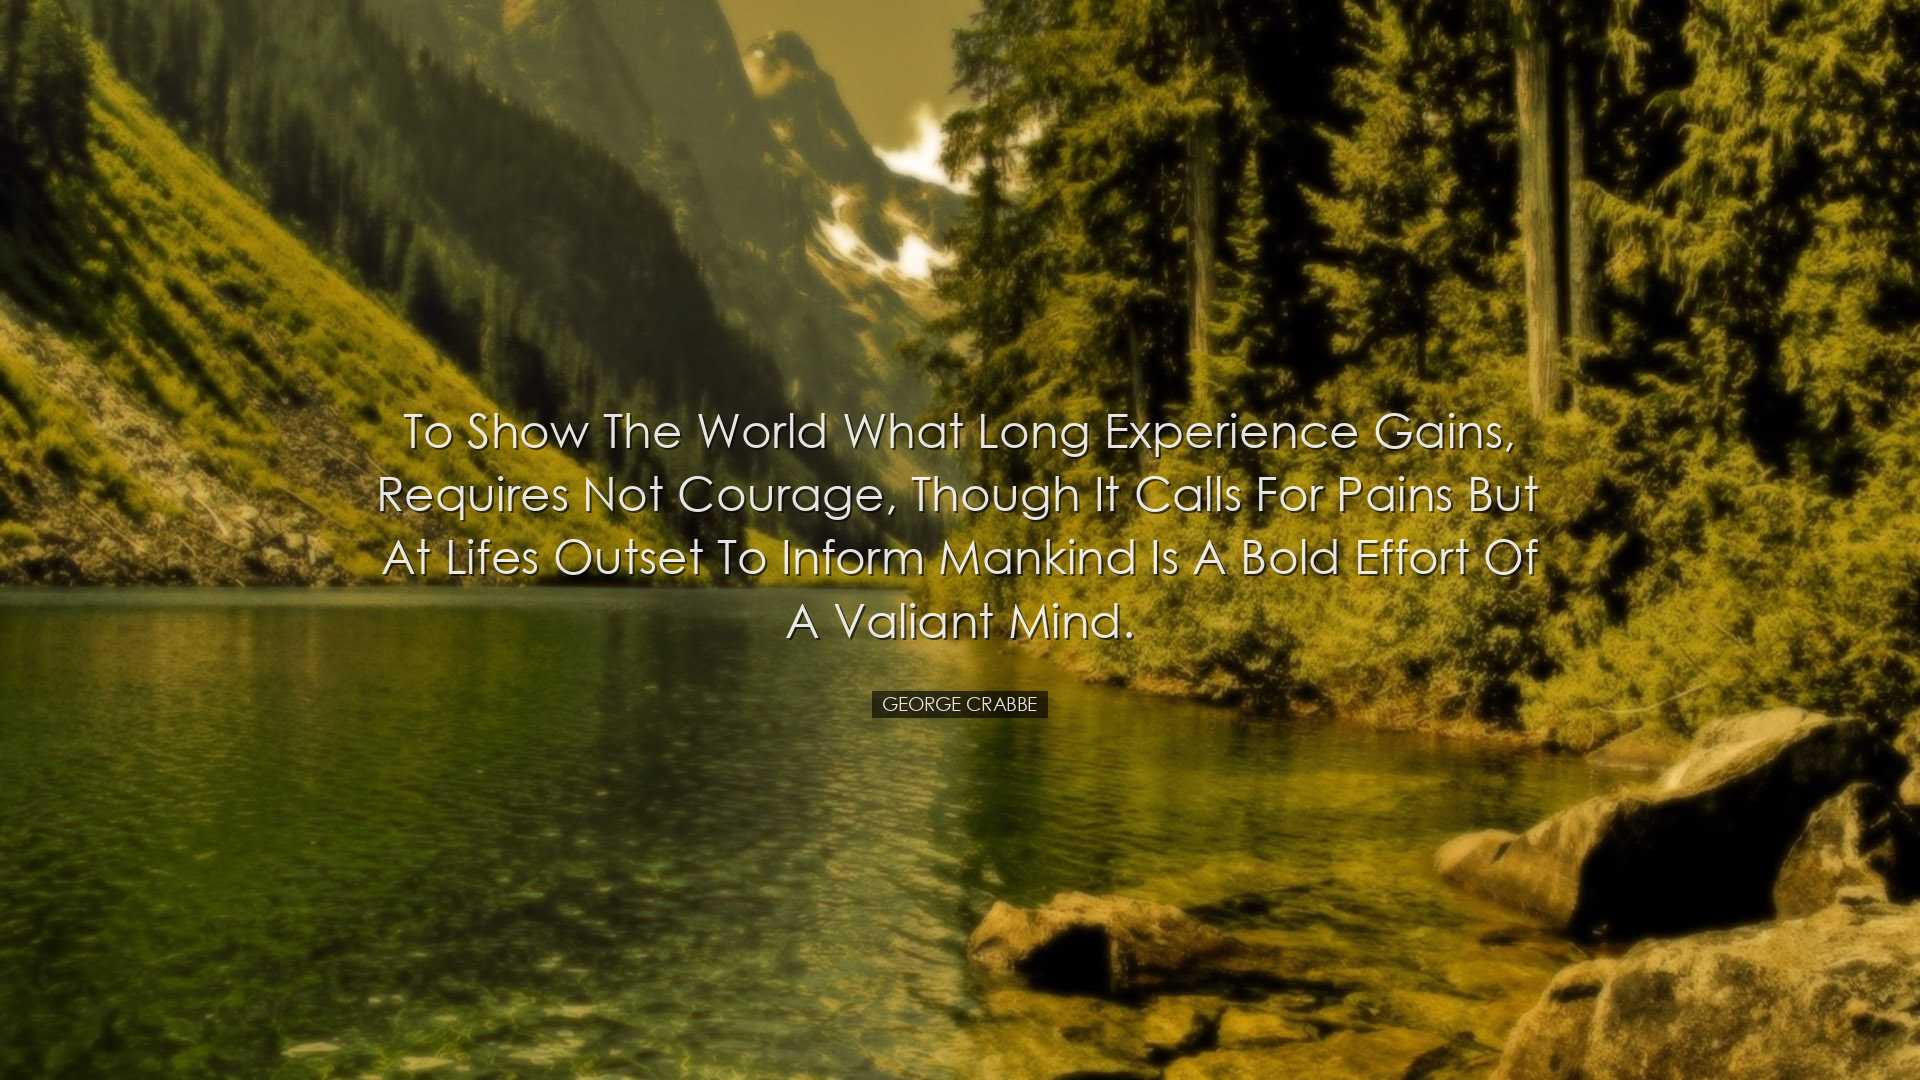 To show the world what long experience gains, requires not courage